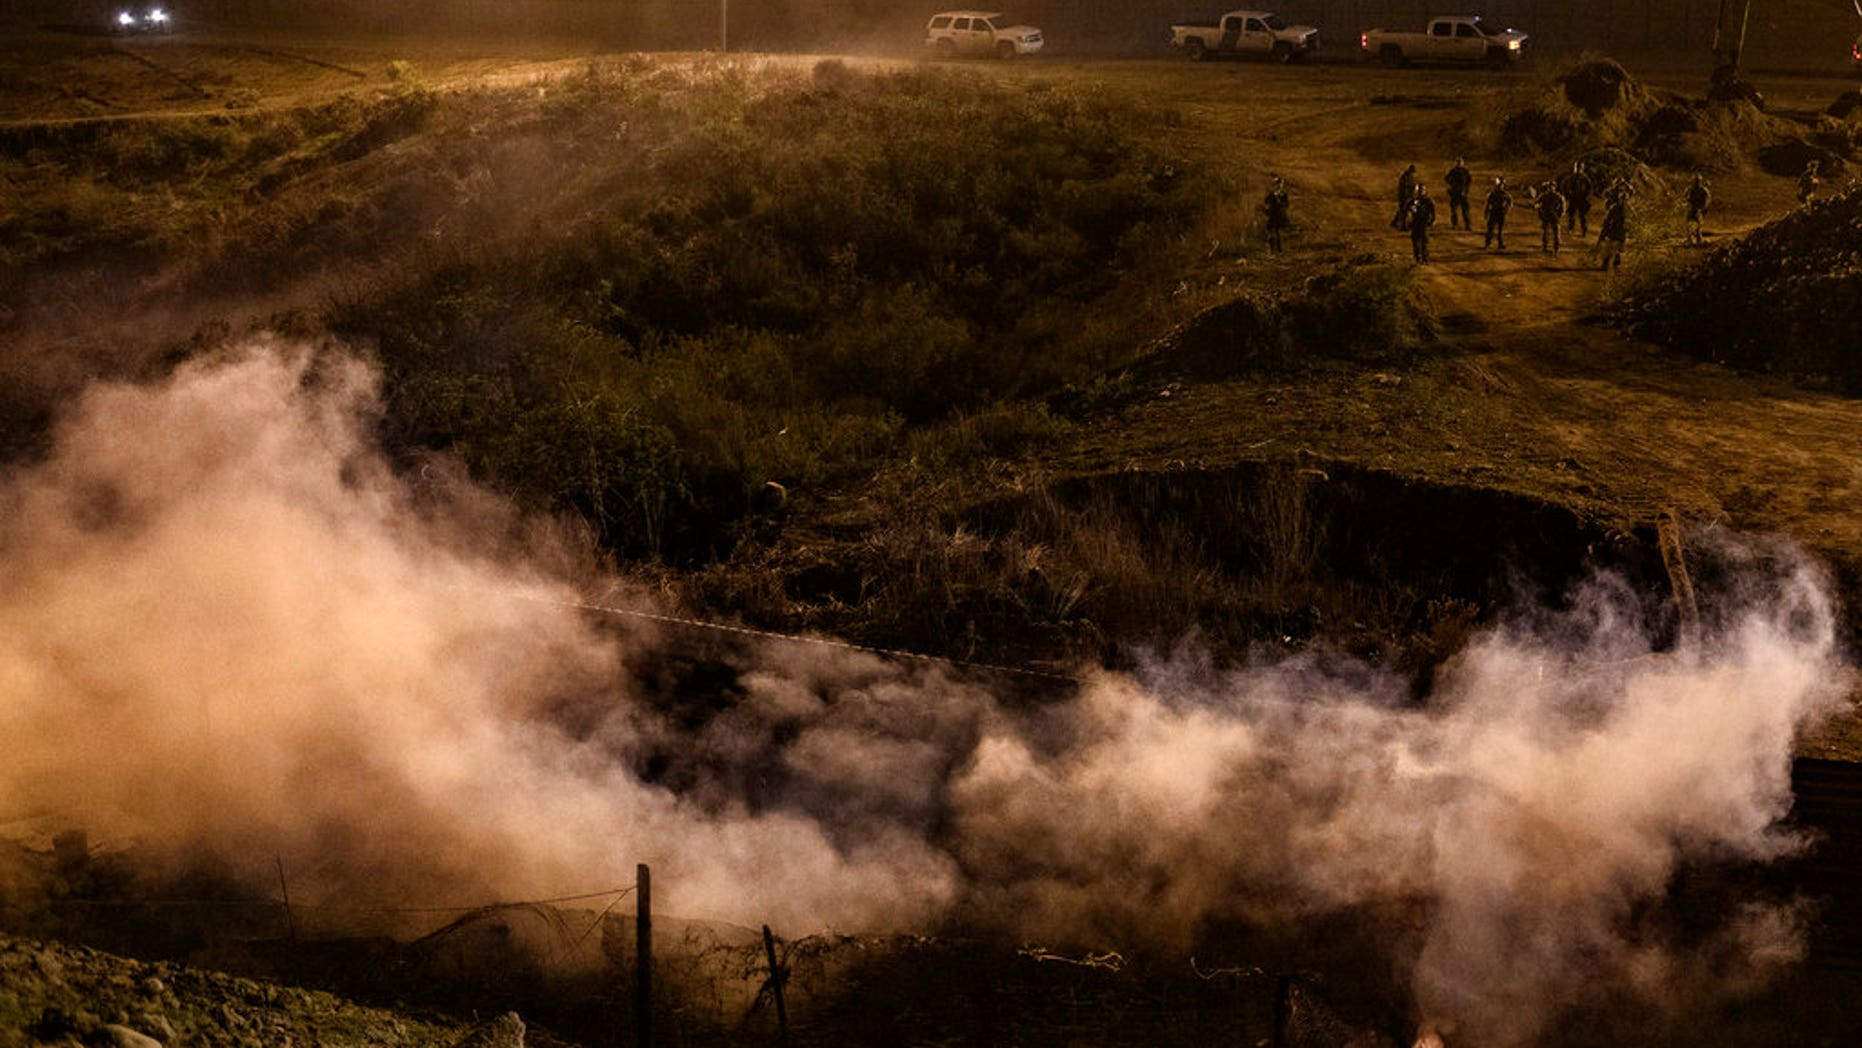 Authorities use tear gas to stop migrants at southern border